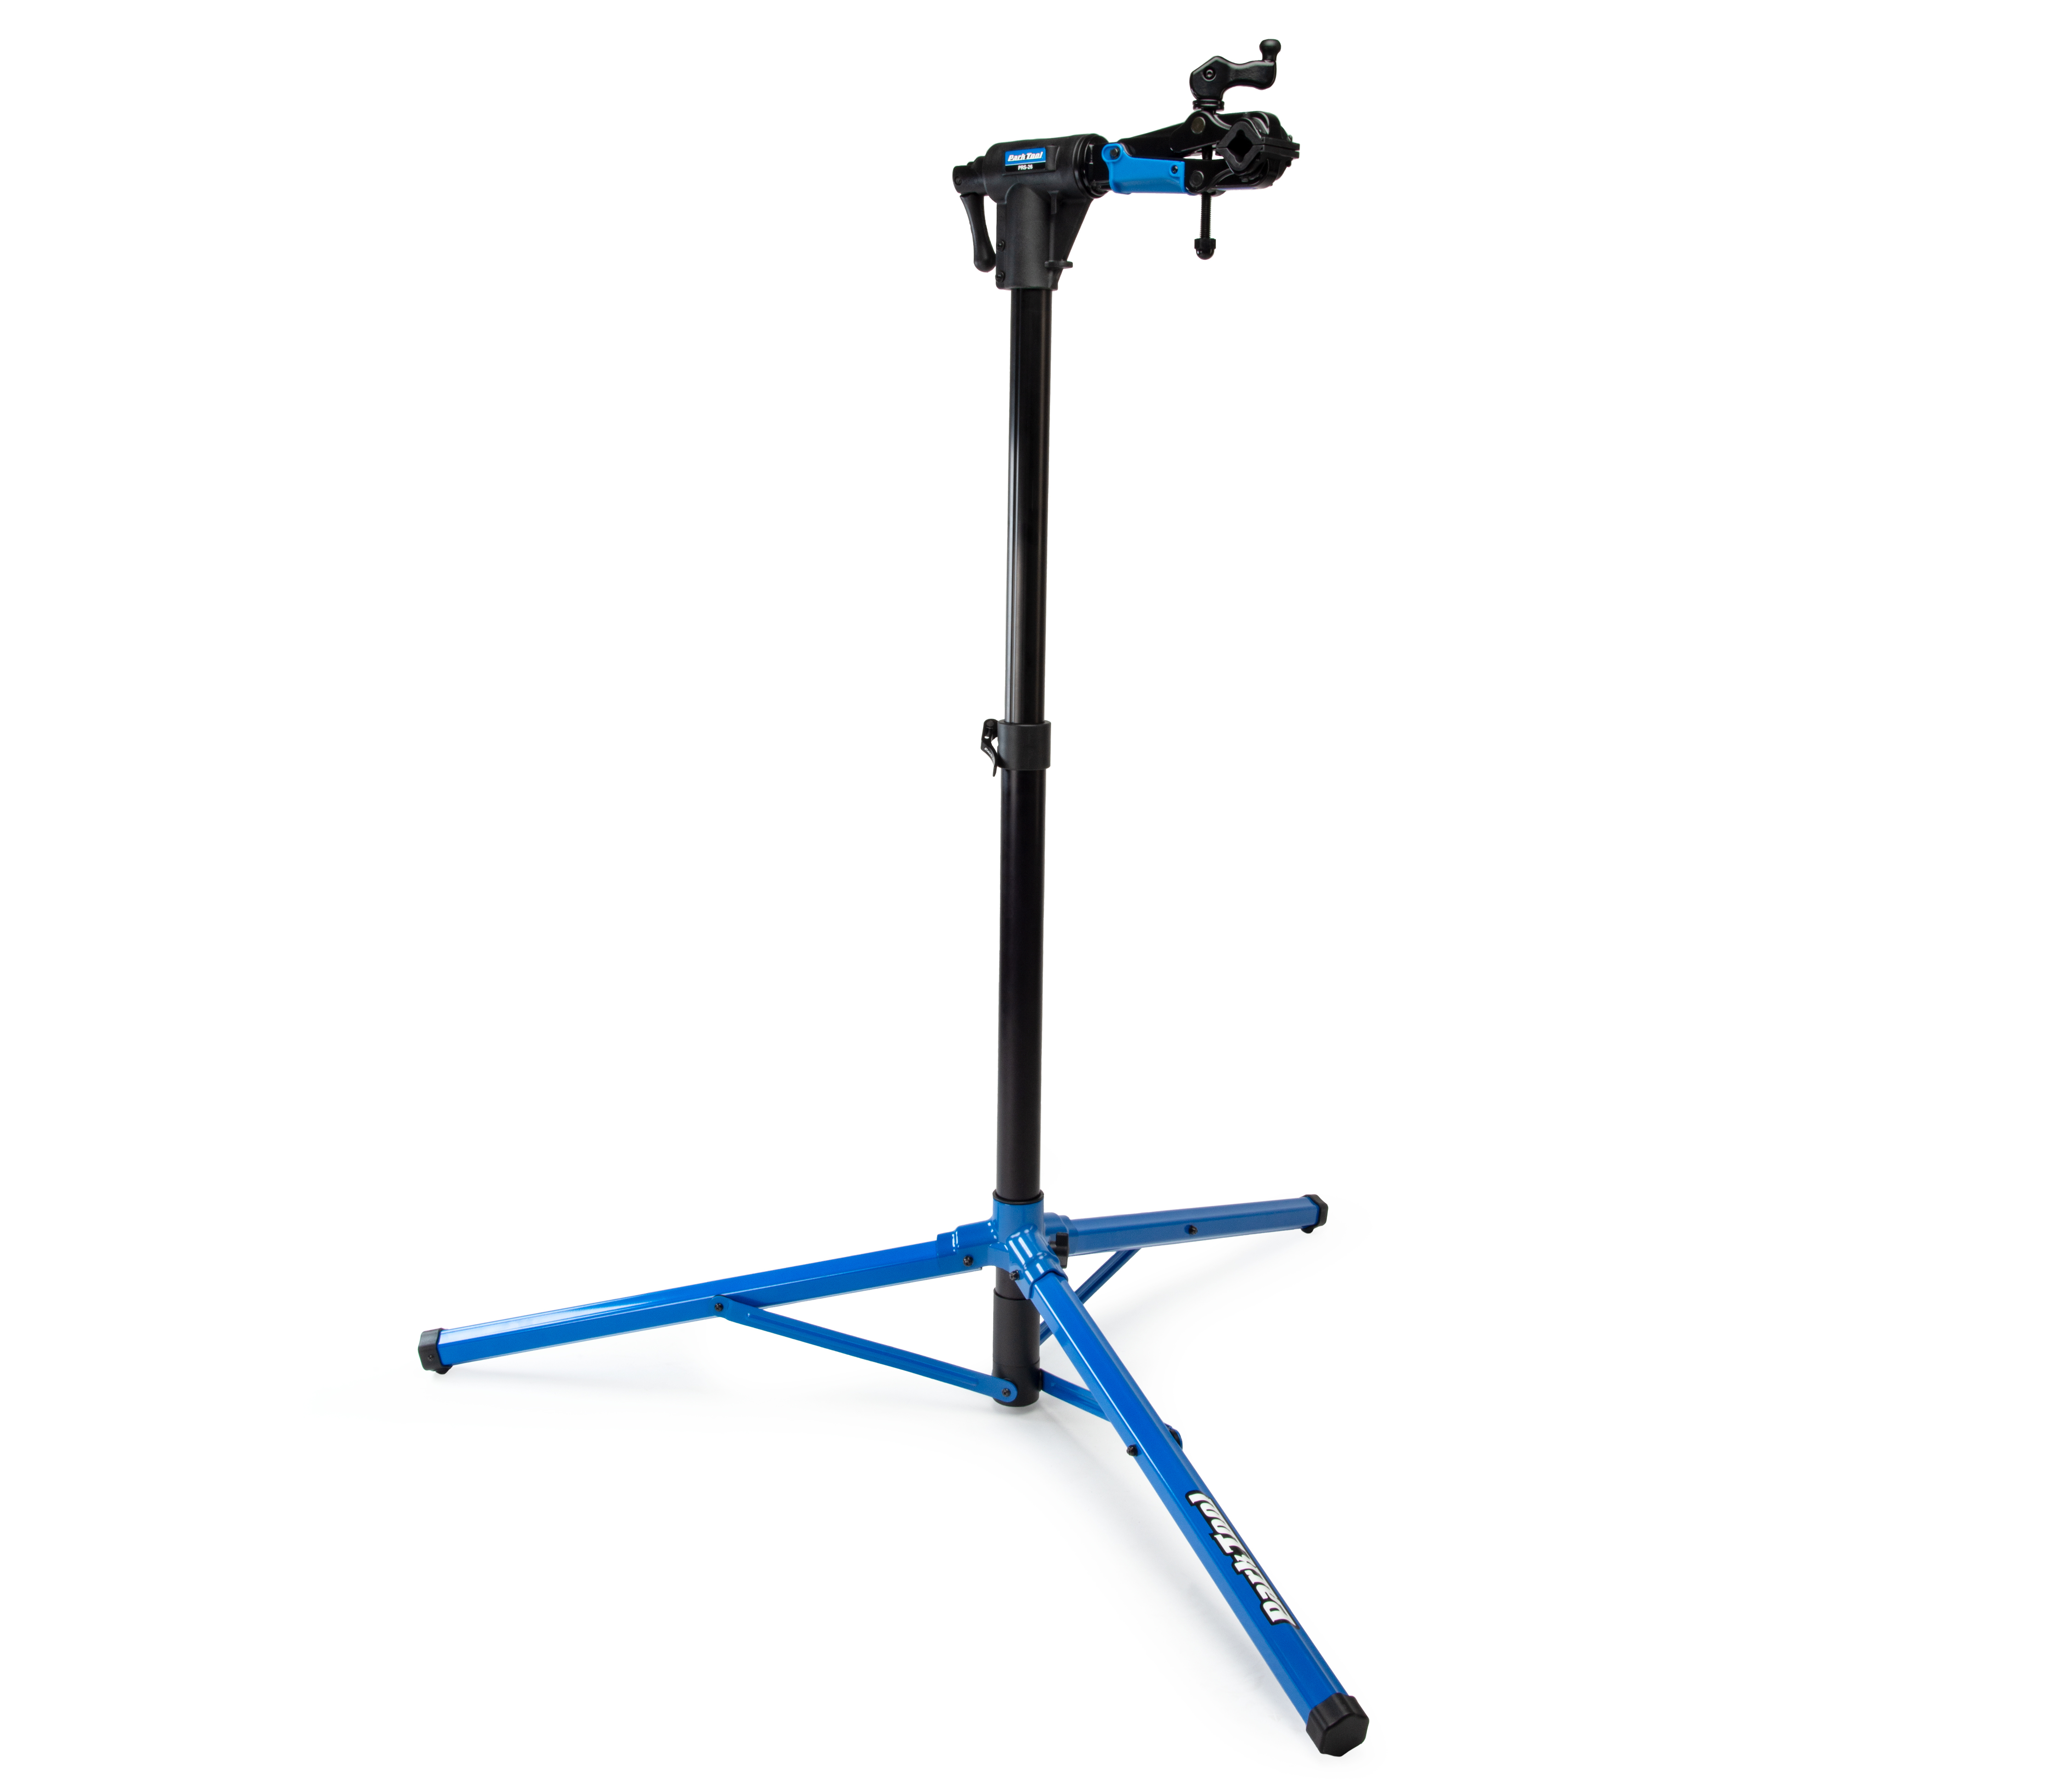 The Park Tool PRS-26 Team Issue Repair Stand